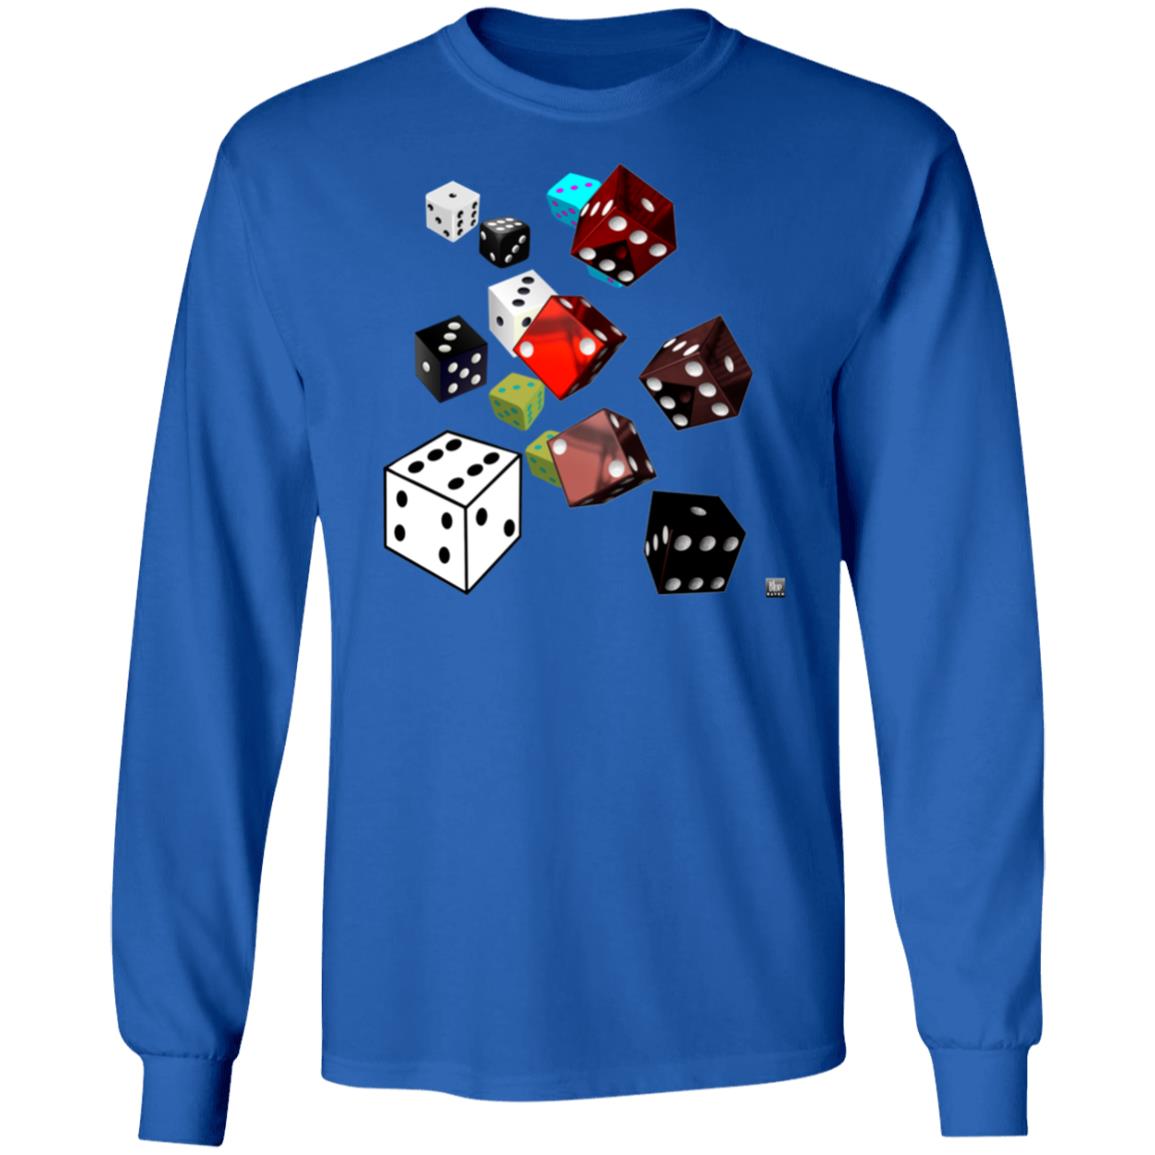 Roll Of The Dice - Men's Long Sleeve T-Shirt